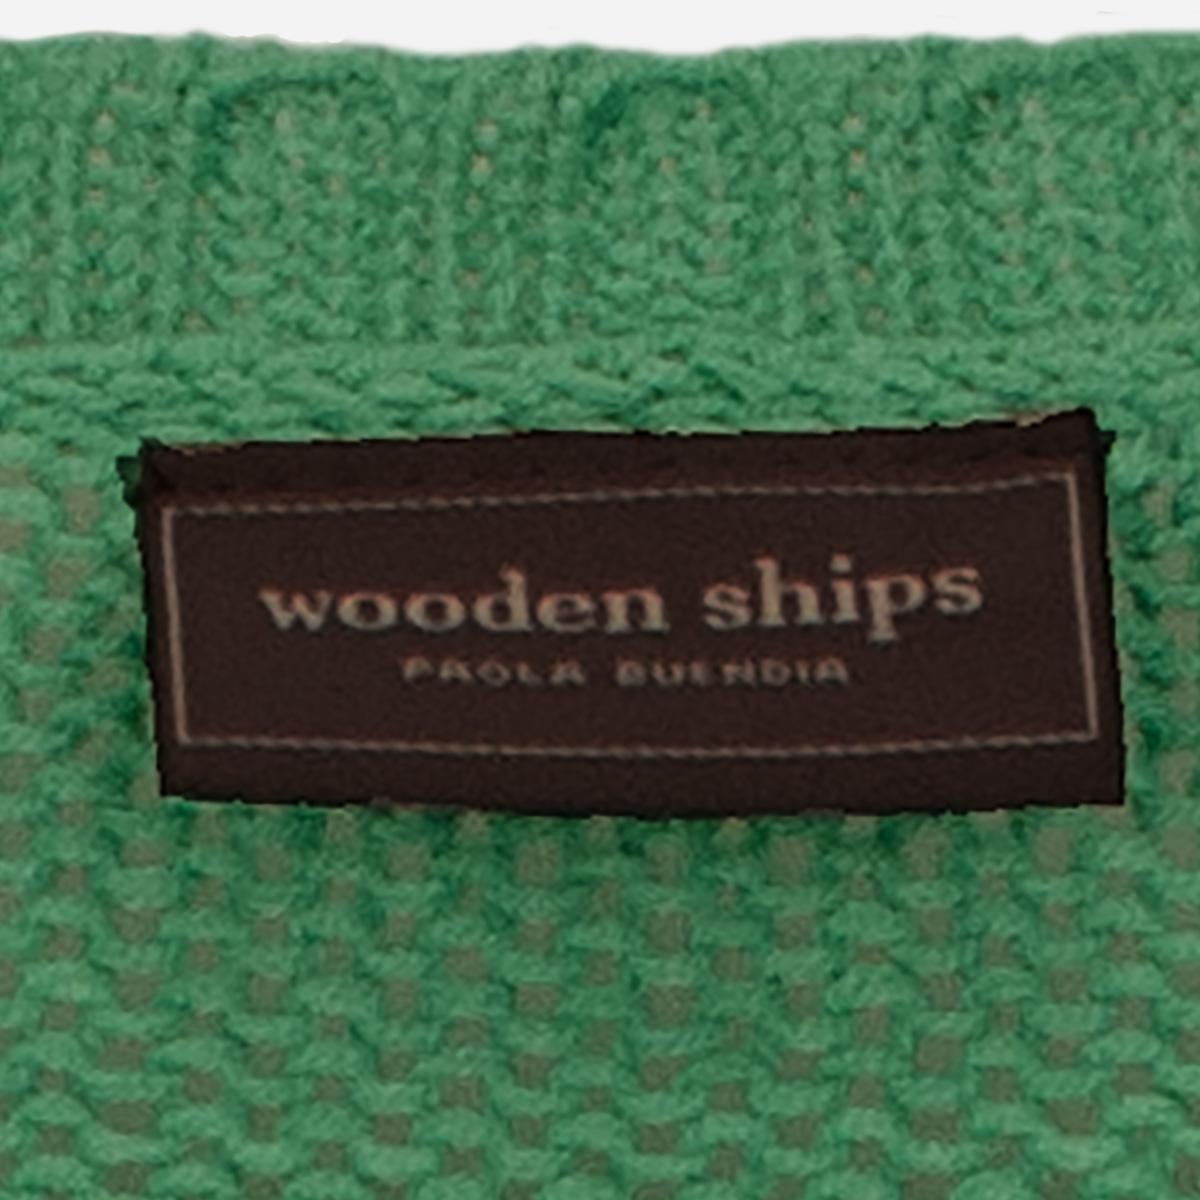 wooden ships Paola Buendía clothing label